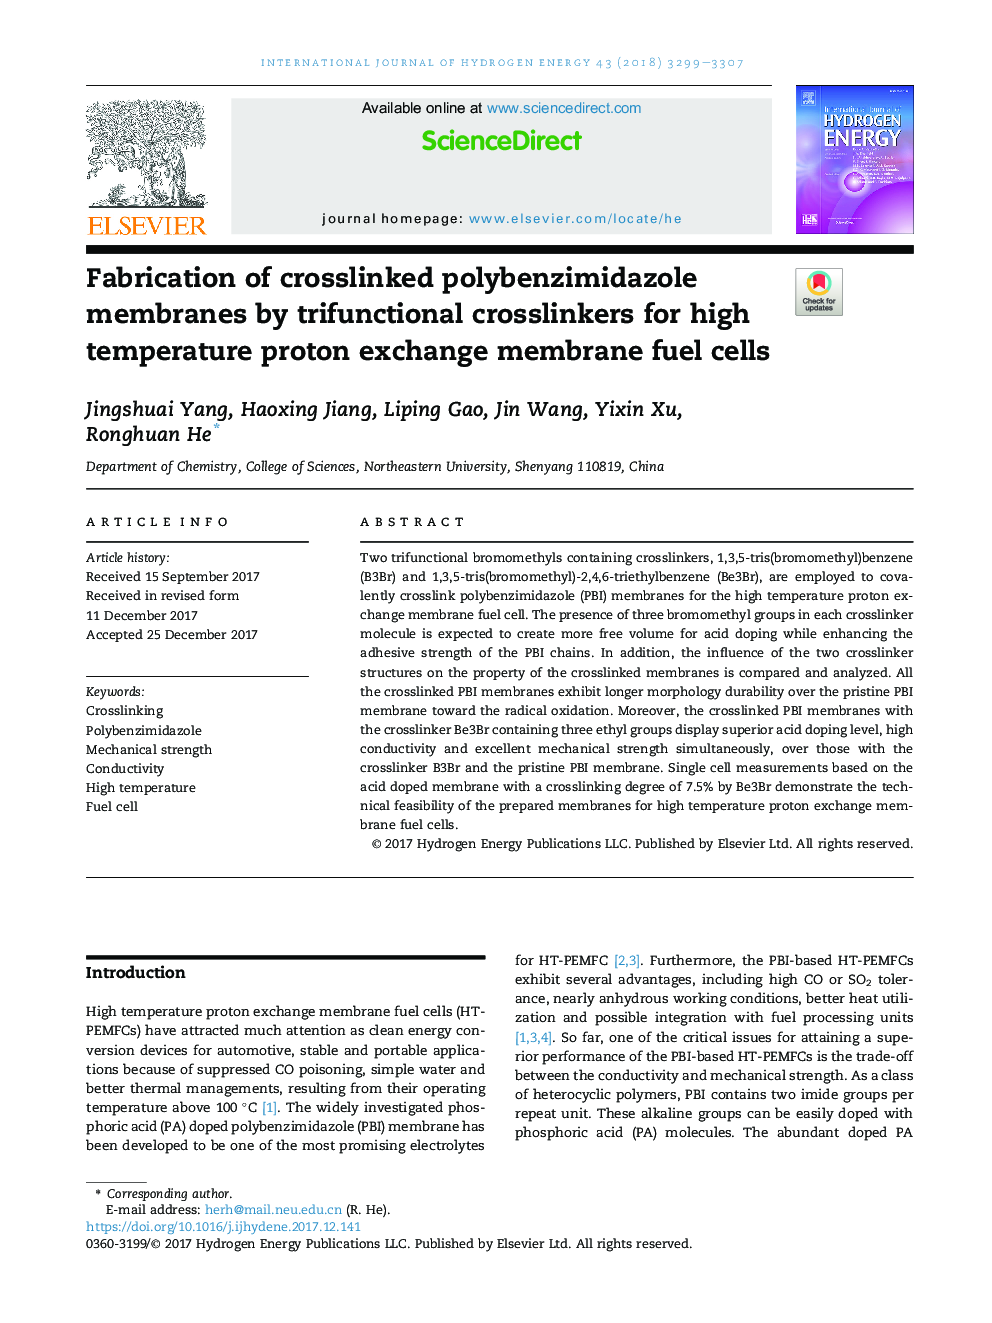 Fabrication of crosslinked polybenzimidazole membranes by trifunctional crosslinkers for high temperature proton exchange membrane fuel cells